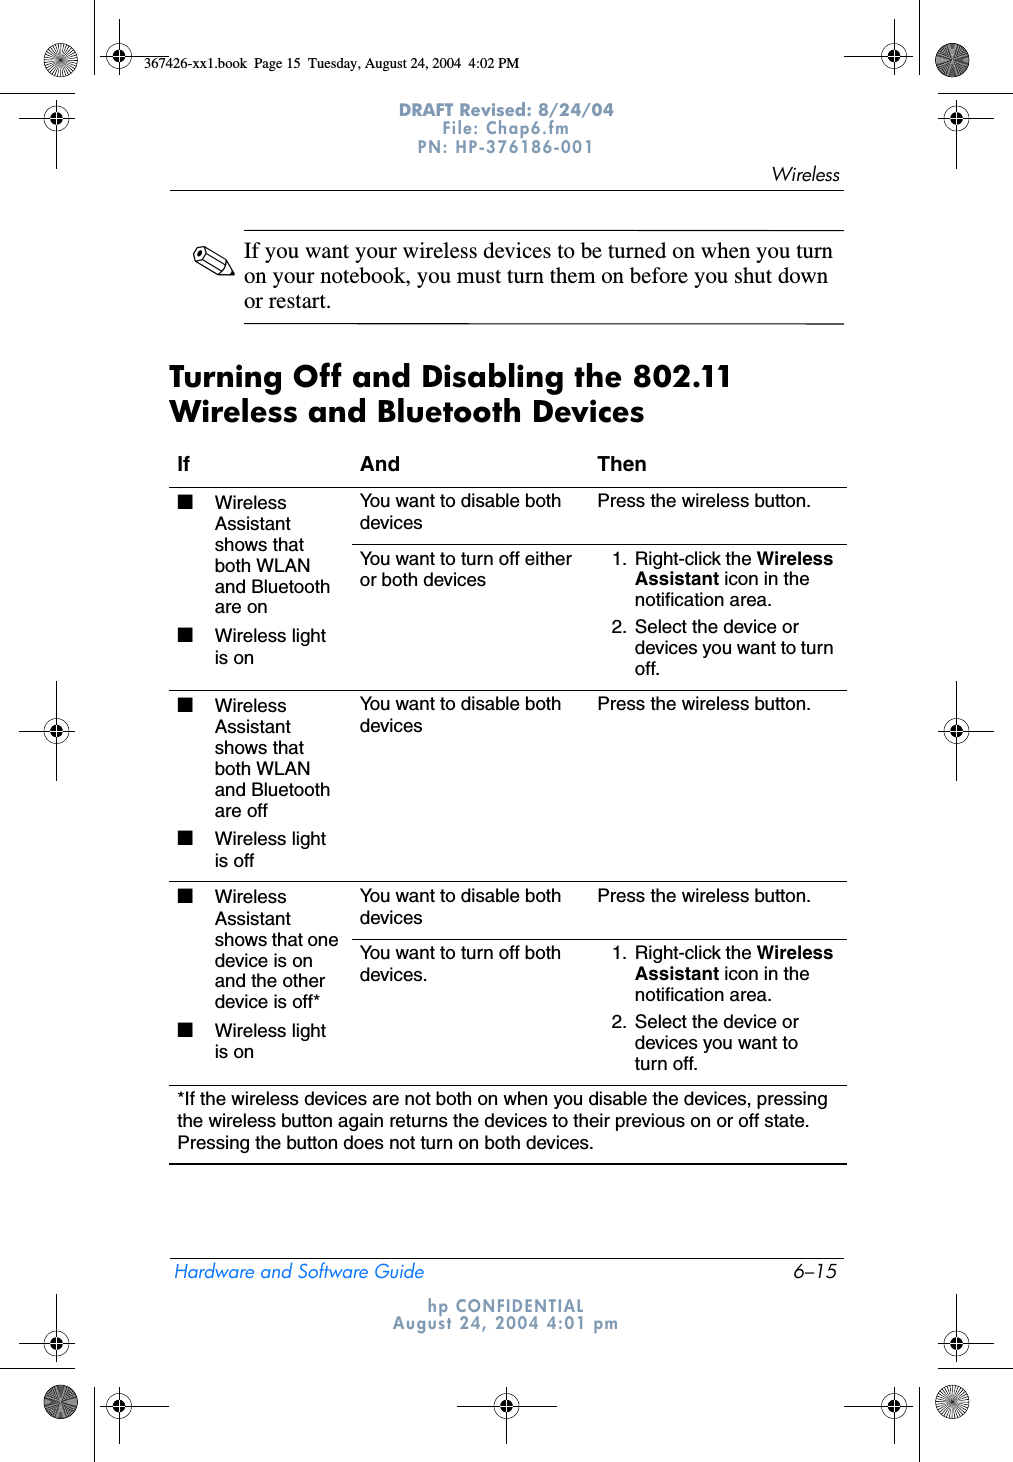 WirelessHardware and Software Guide 6–15DRAFT Revised: 8/24/04File: Chap6.fm PN: HP-376186-001 hp CONFIDENTIALAugust 24, 2004 4:01 pm✎If you want your wireless devices to be turned on when you turn on your notebook, you must turn them on before you shut down or restart.Turning Off and Disabling the 802.11 Wireless and Bluetooth DevicesIf And Then■Wireless Assistant shows that both WLAN and Bluetooth are on■Wireless light is onYou want to disable both devicesPress the wireless button.You want to turn off either or both devices1. Right-click the Wireless Assistant icon in the notification area.2. Select the device or devices you want to turn off.■Wireless Assistant shows that both WLAN and Bluetooth are off■Wireless light is offYou want to disable both devicesPress the wireless button.■Wireless Assistant shows that one device is on and the other device is off*■Wireless light is onYou want to disable both devicesPress the wireless button.You want to turn off both devices.1. Right-click the Wireless Assistant icon in the notification area.2. Select the device or devices you want to turn off.*If the wireless devices are not both on when you disable the devices, pressing the wireless button again returns the devices to their previous on or off state. Pressing the button does not turn on both devices.367426-xx1.book  Page 15  Tuesday, August 24, 2004  4:02 PM